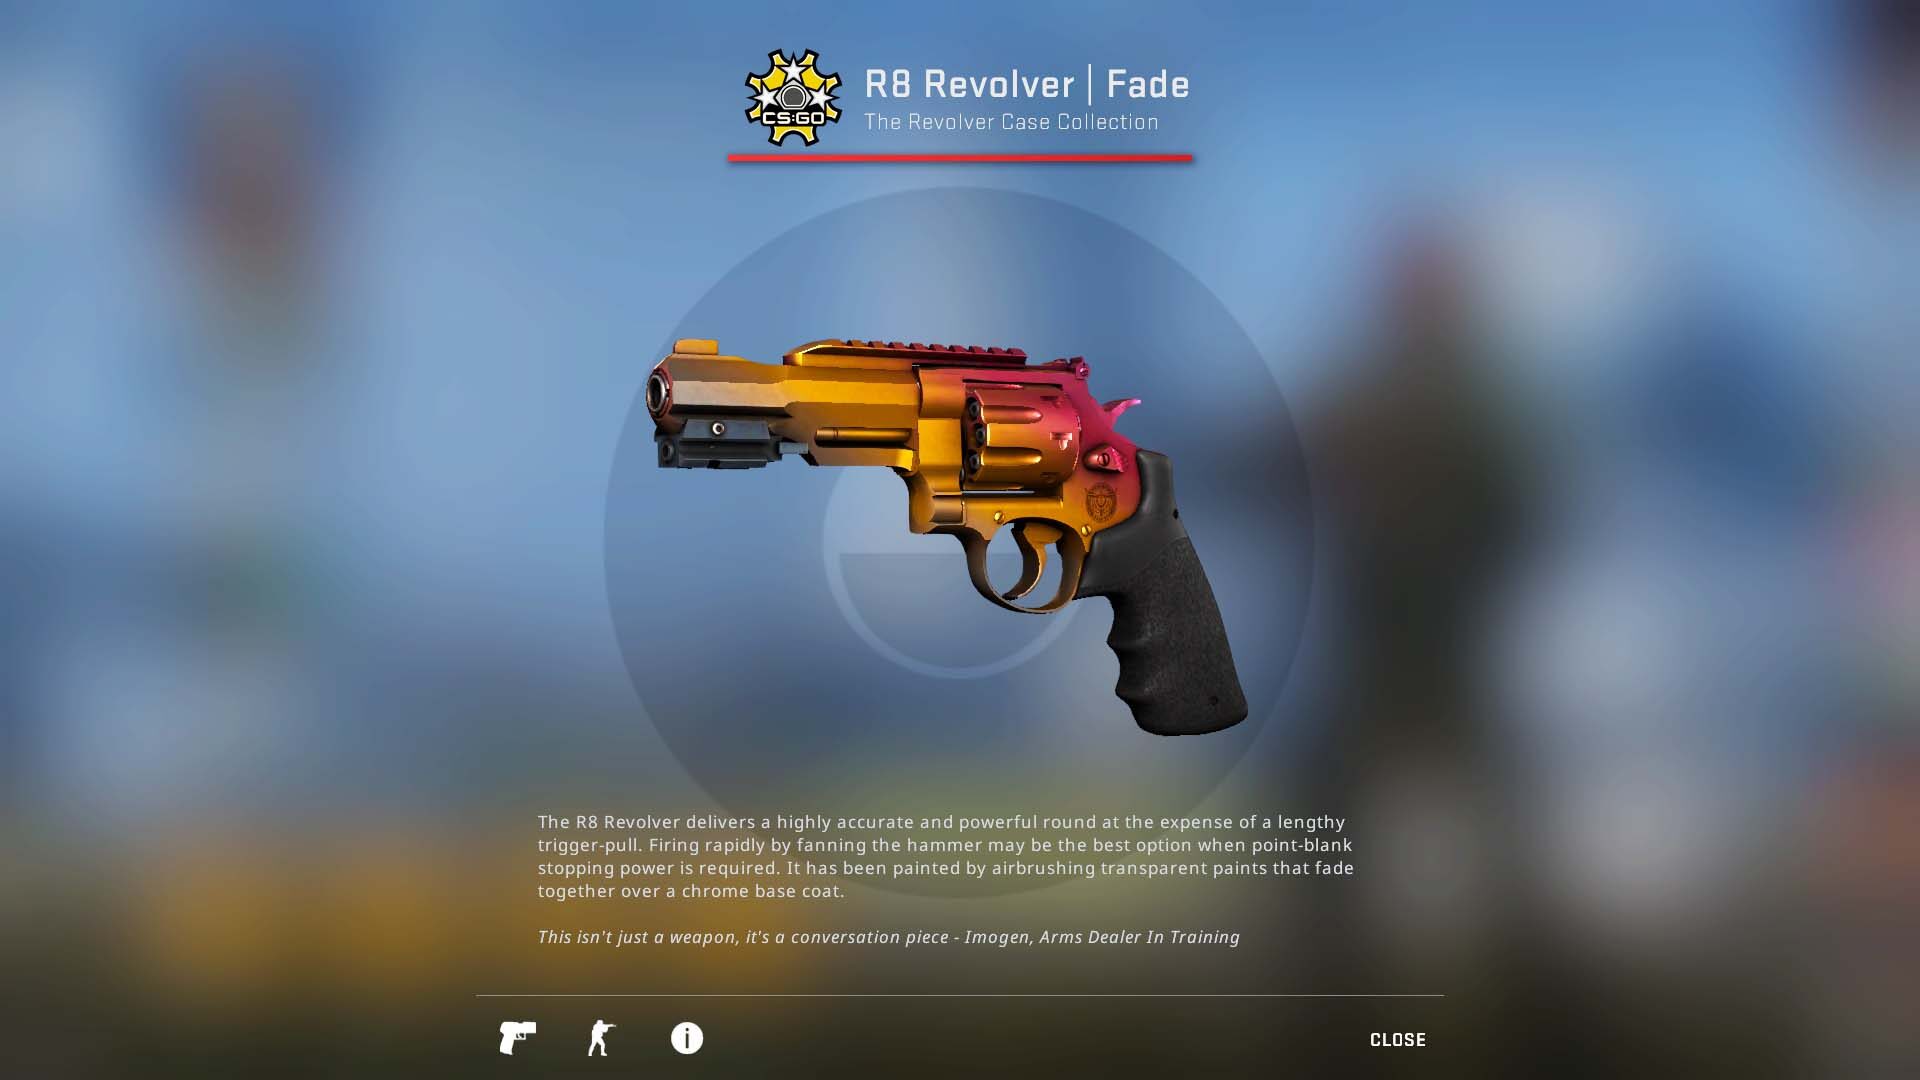 R8 Revolver Canal Spray cs go skin download the last version for iphone